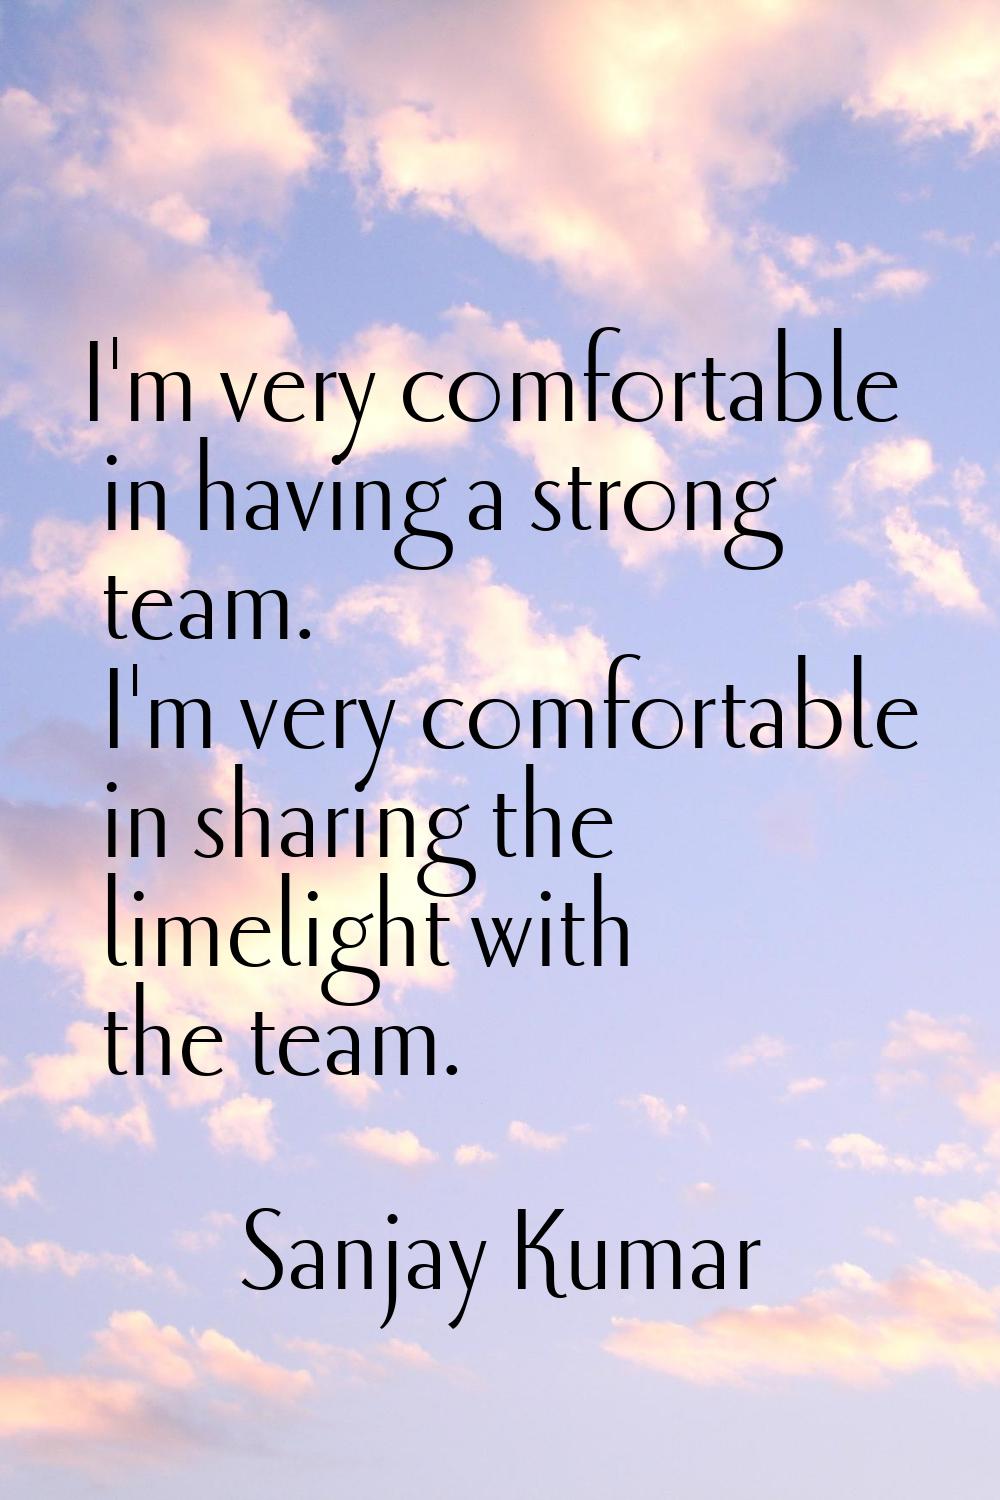 I'm very comfortable in having a strong team. I'm very comfortable in sharing the limelight with th